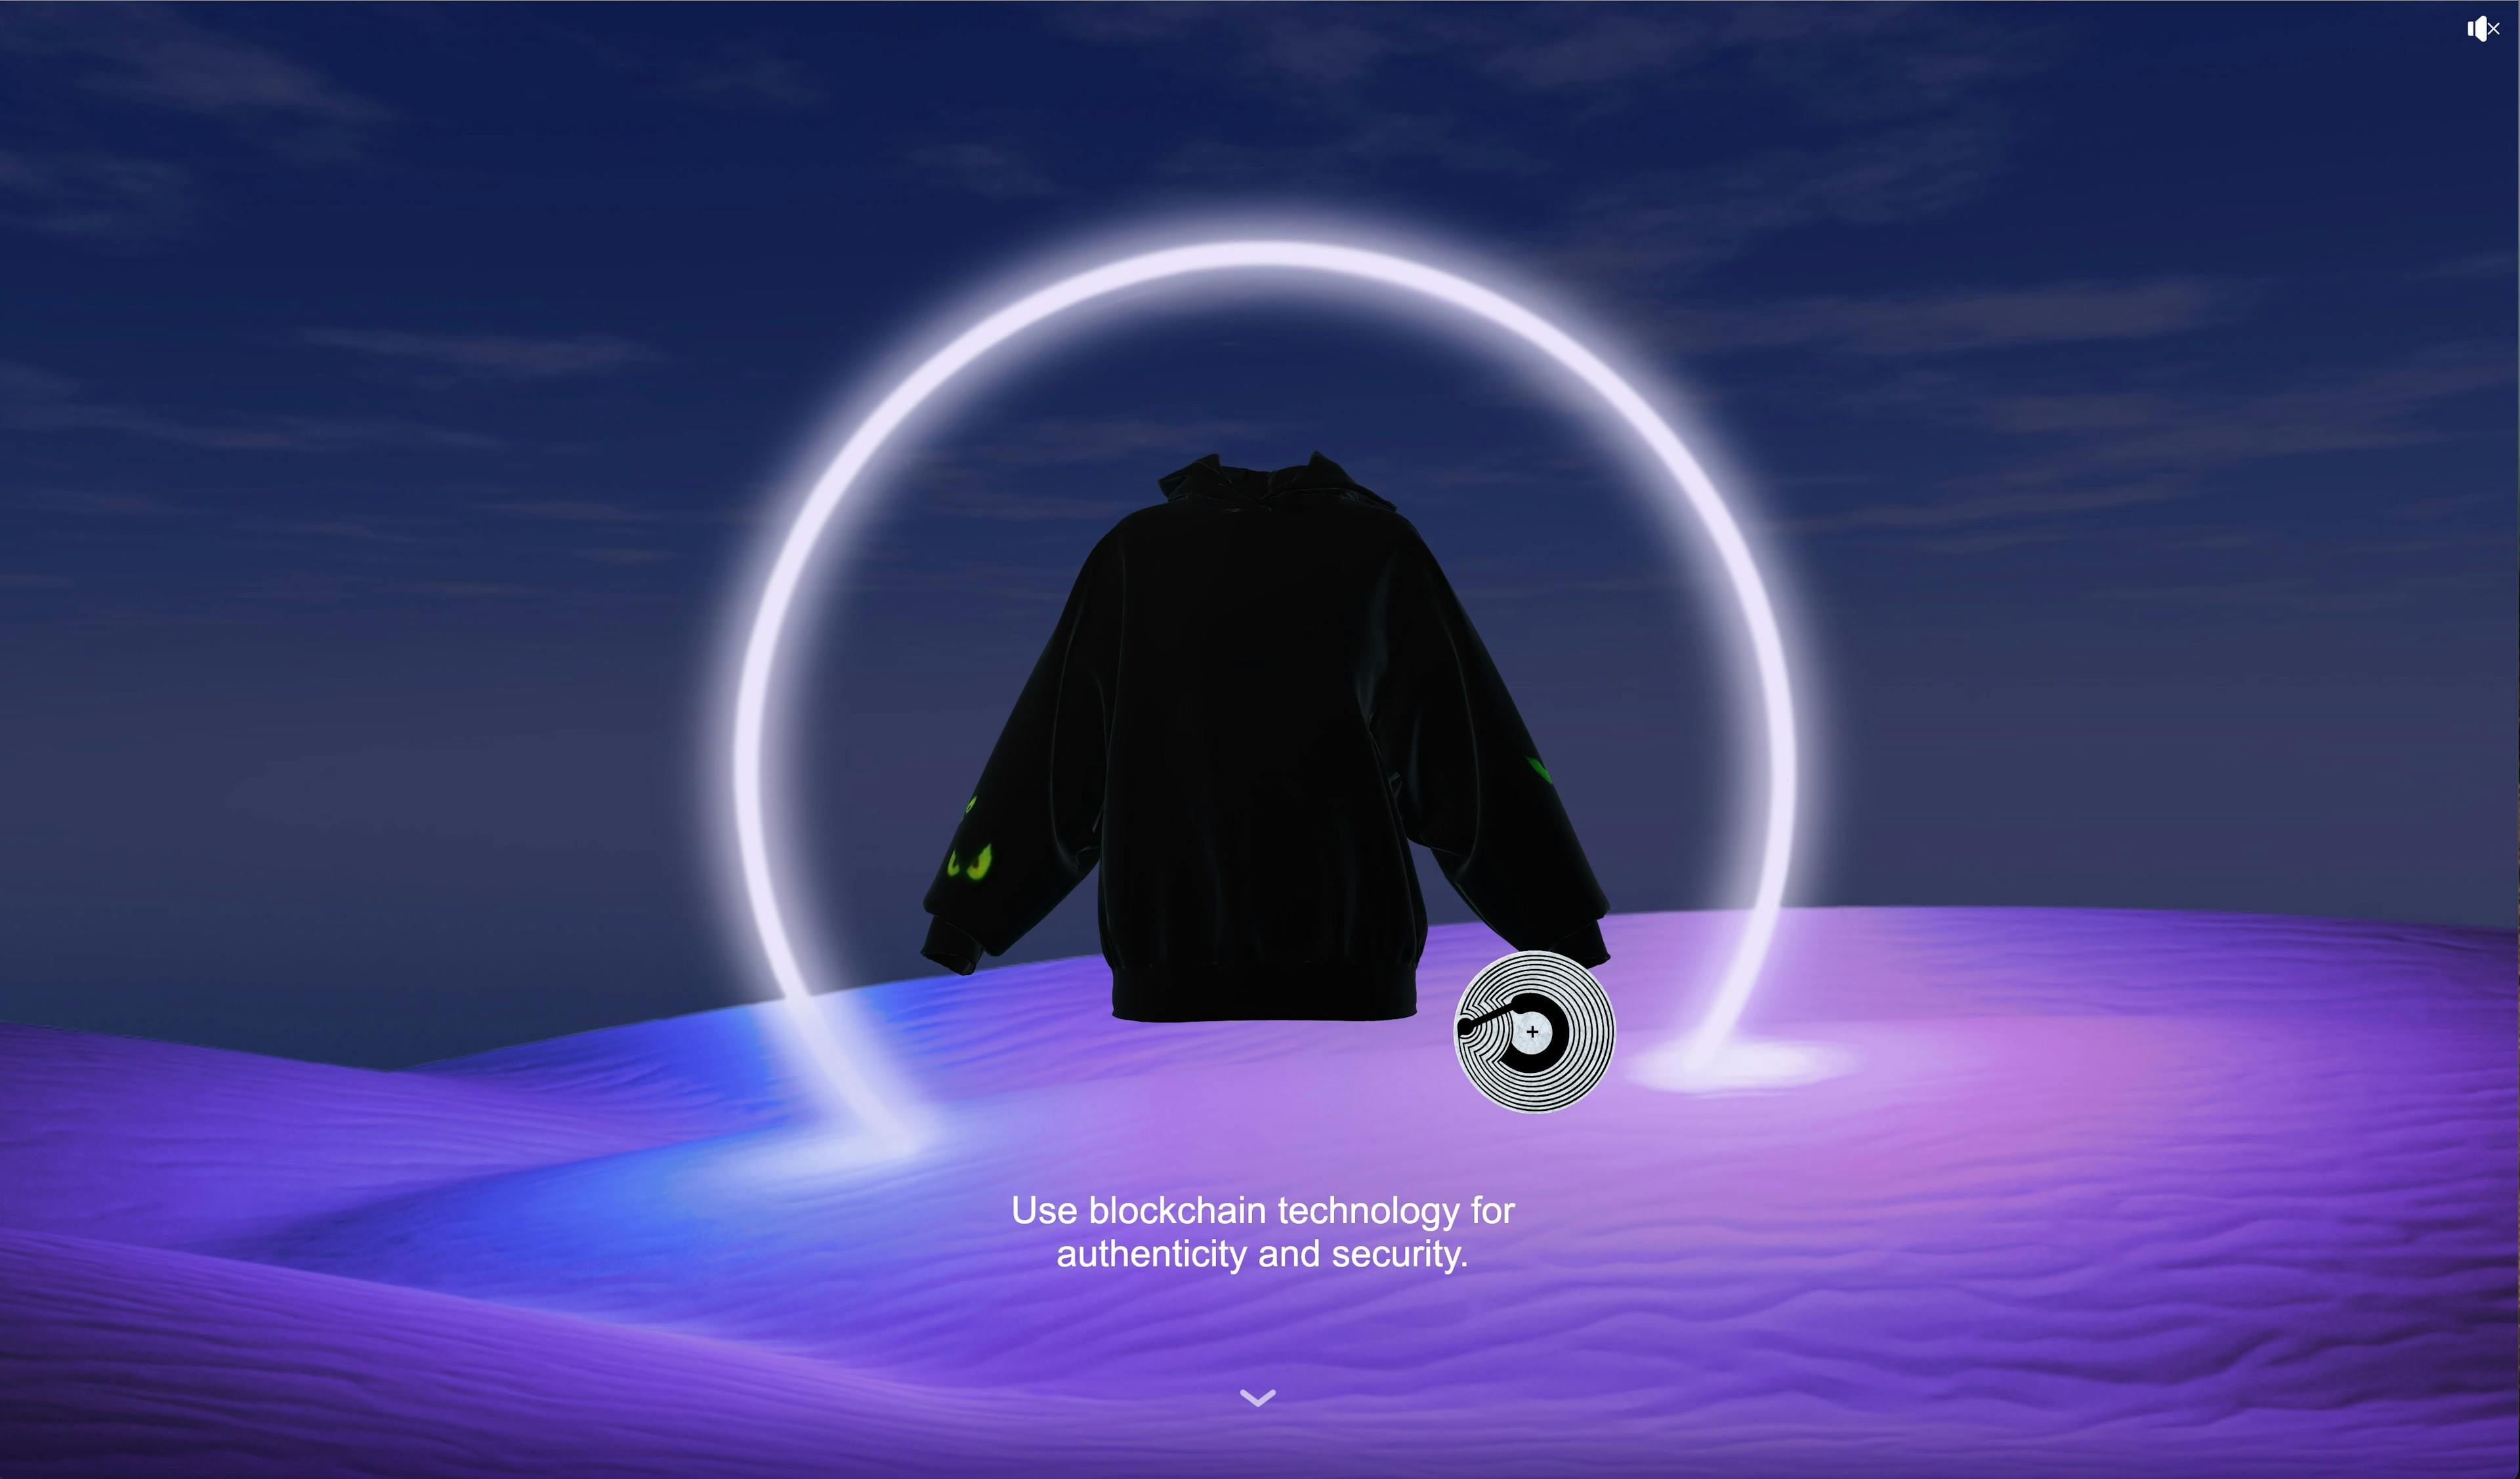 A hoodie and an nfc tag floating in front of a purple desert with a light halo and partly cloudy background